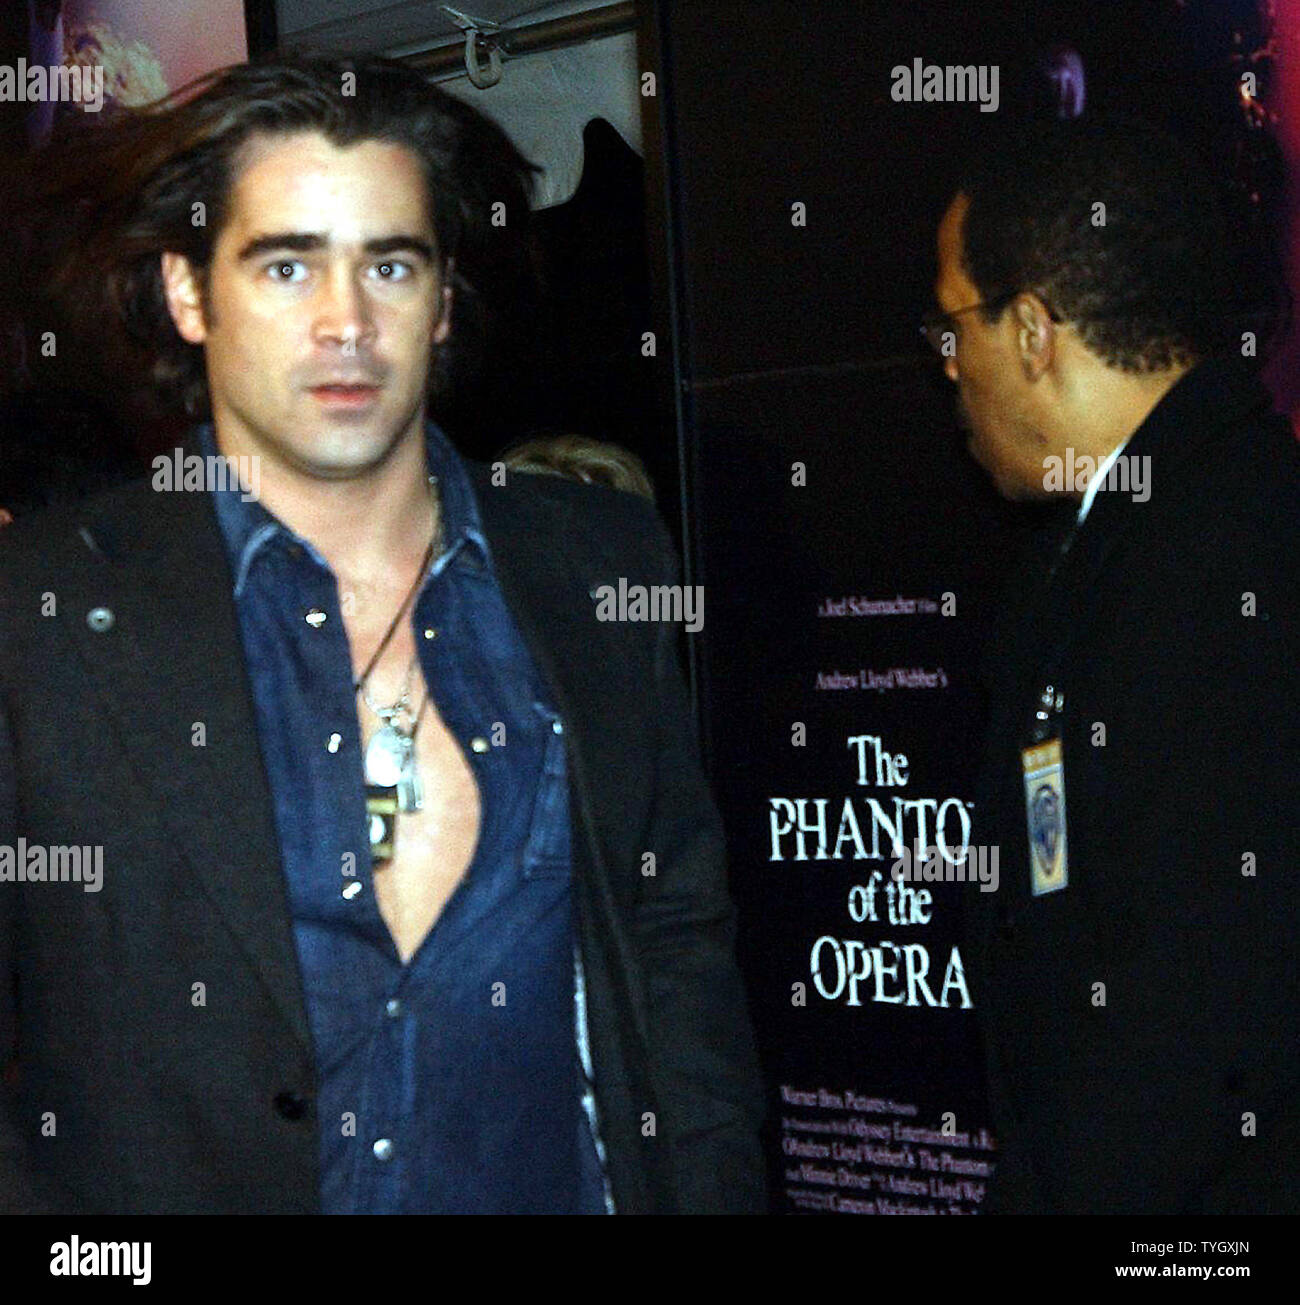 Actor Colin Farrell dashes past the media at the 12/12/04 New York premiere for the film "The Phantom of the Opera" which is directed by his friend Joel Schumacher.  (UPI Photo/Ezio Petersen) Stock Photo